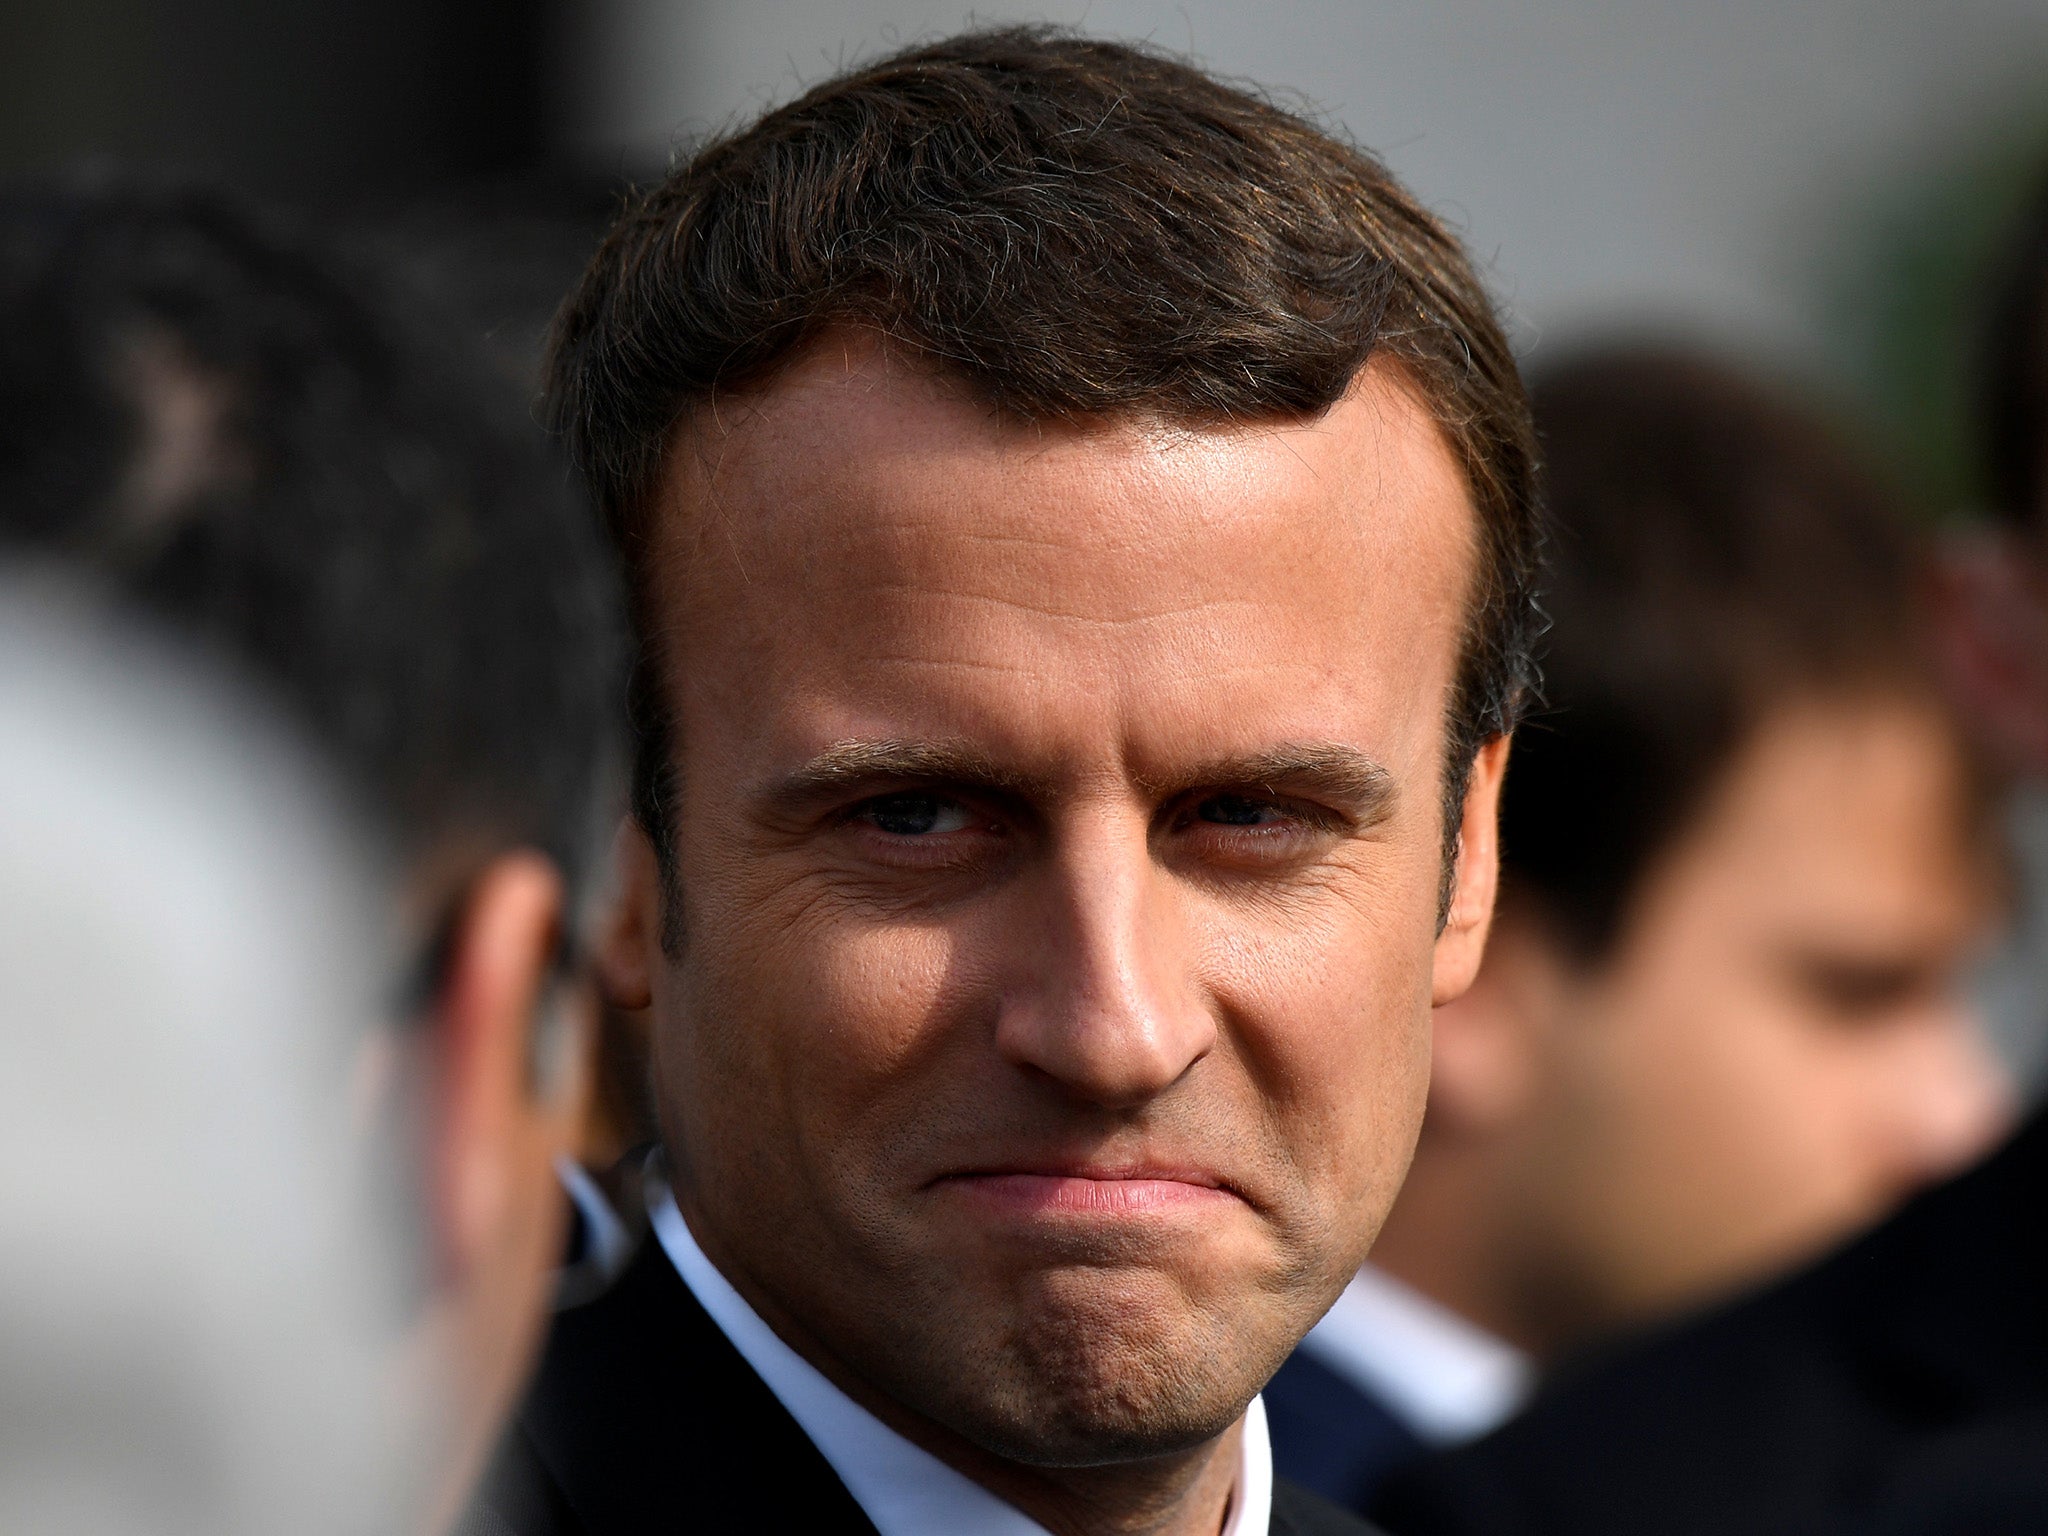 Emmanuel Macron is serious about restoring France's competitiveness in the financial sphere